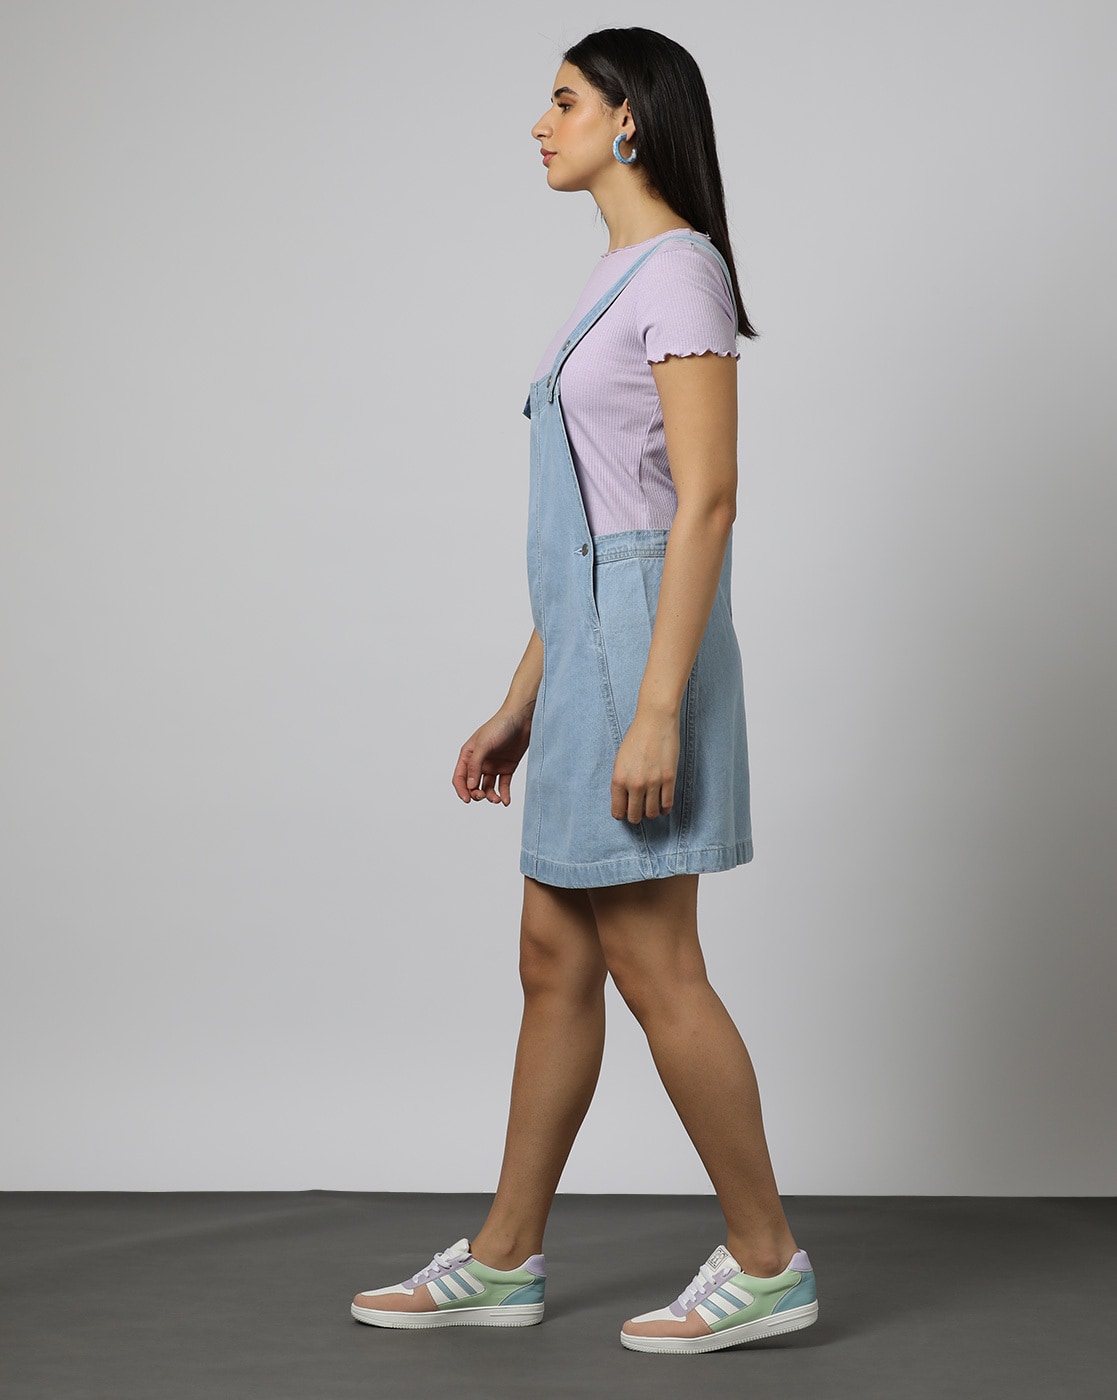 Fit Style Girls Kids Denim Dress, Size: 22-32 also available in 32-36 at Rs  645/piece in Kolkata